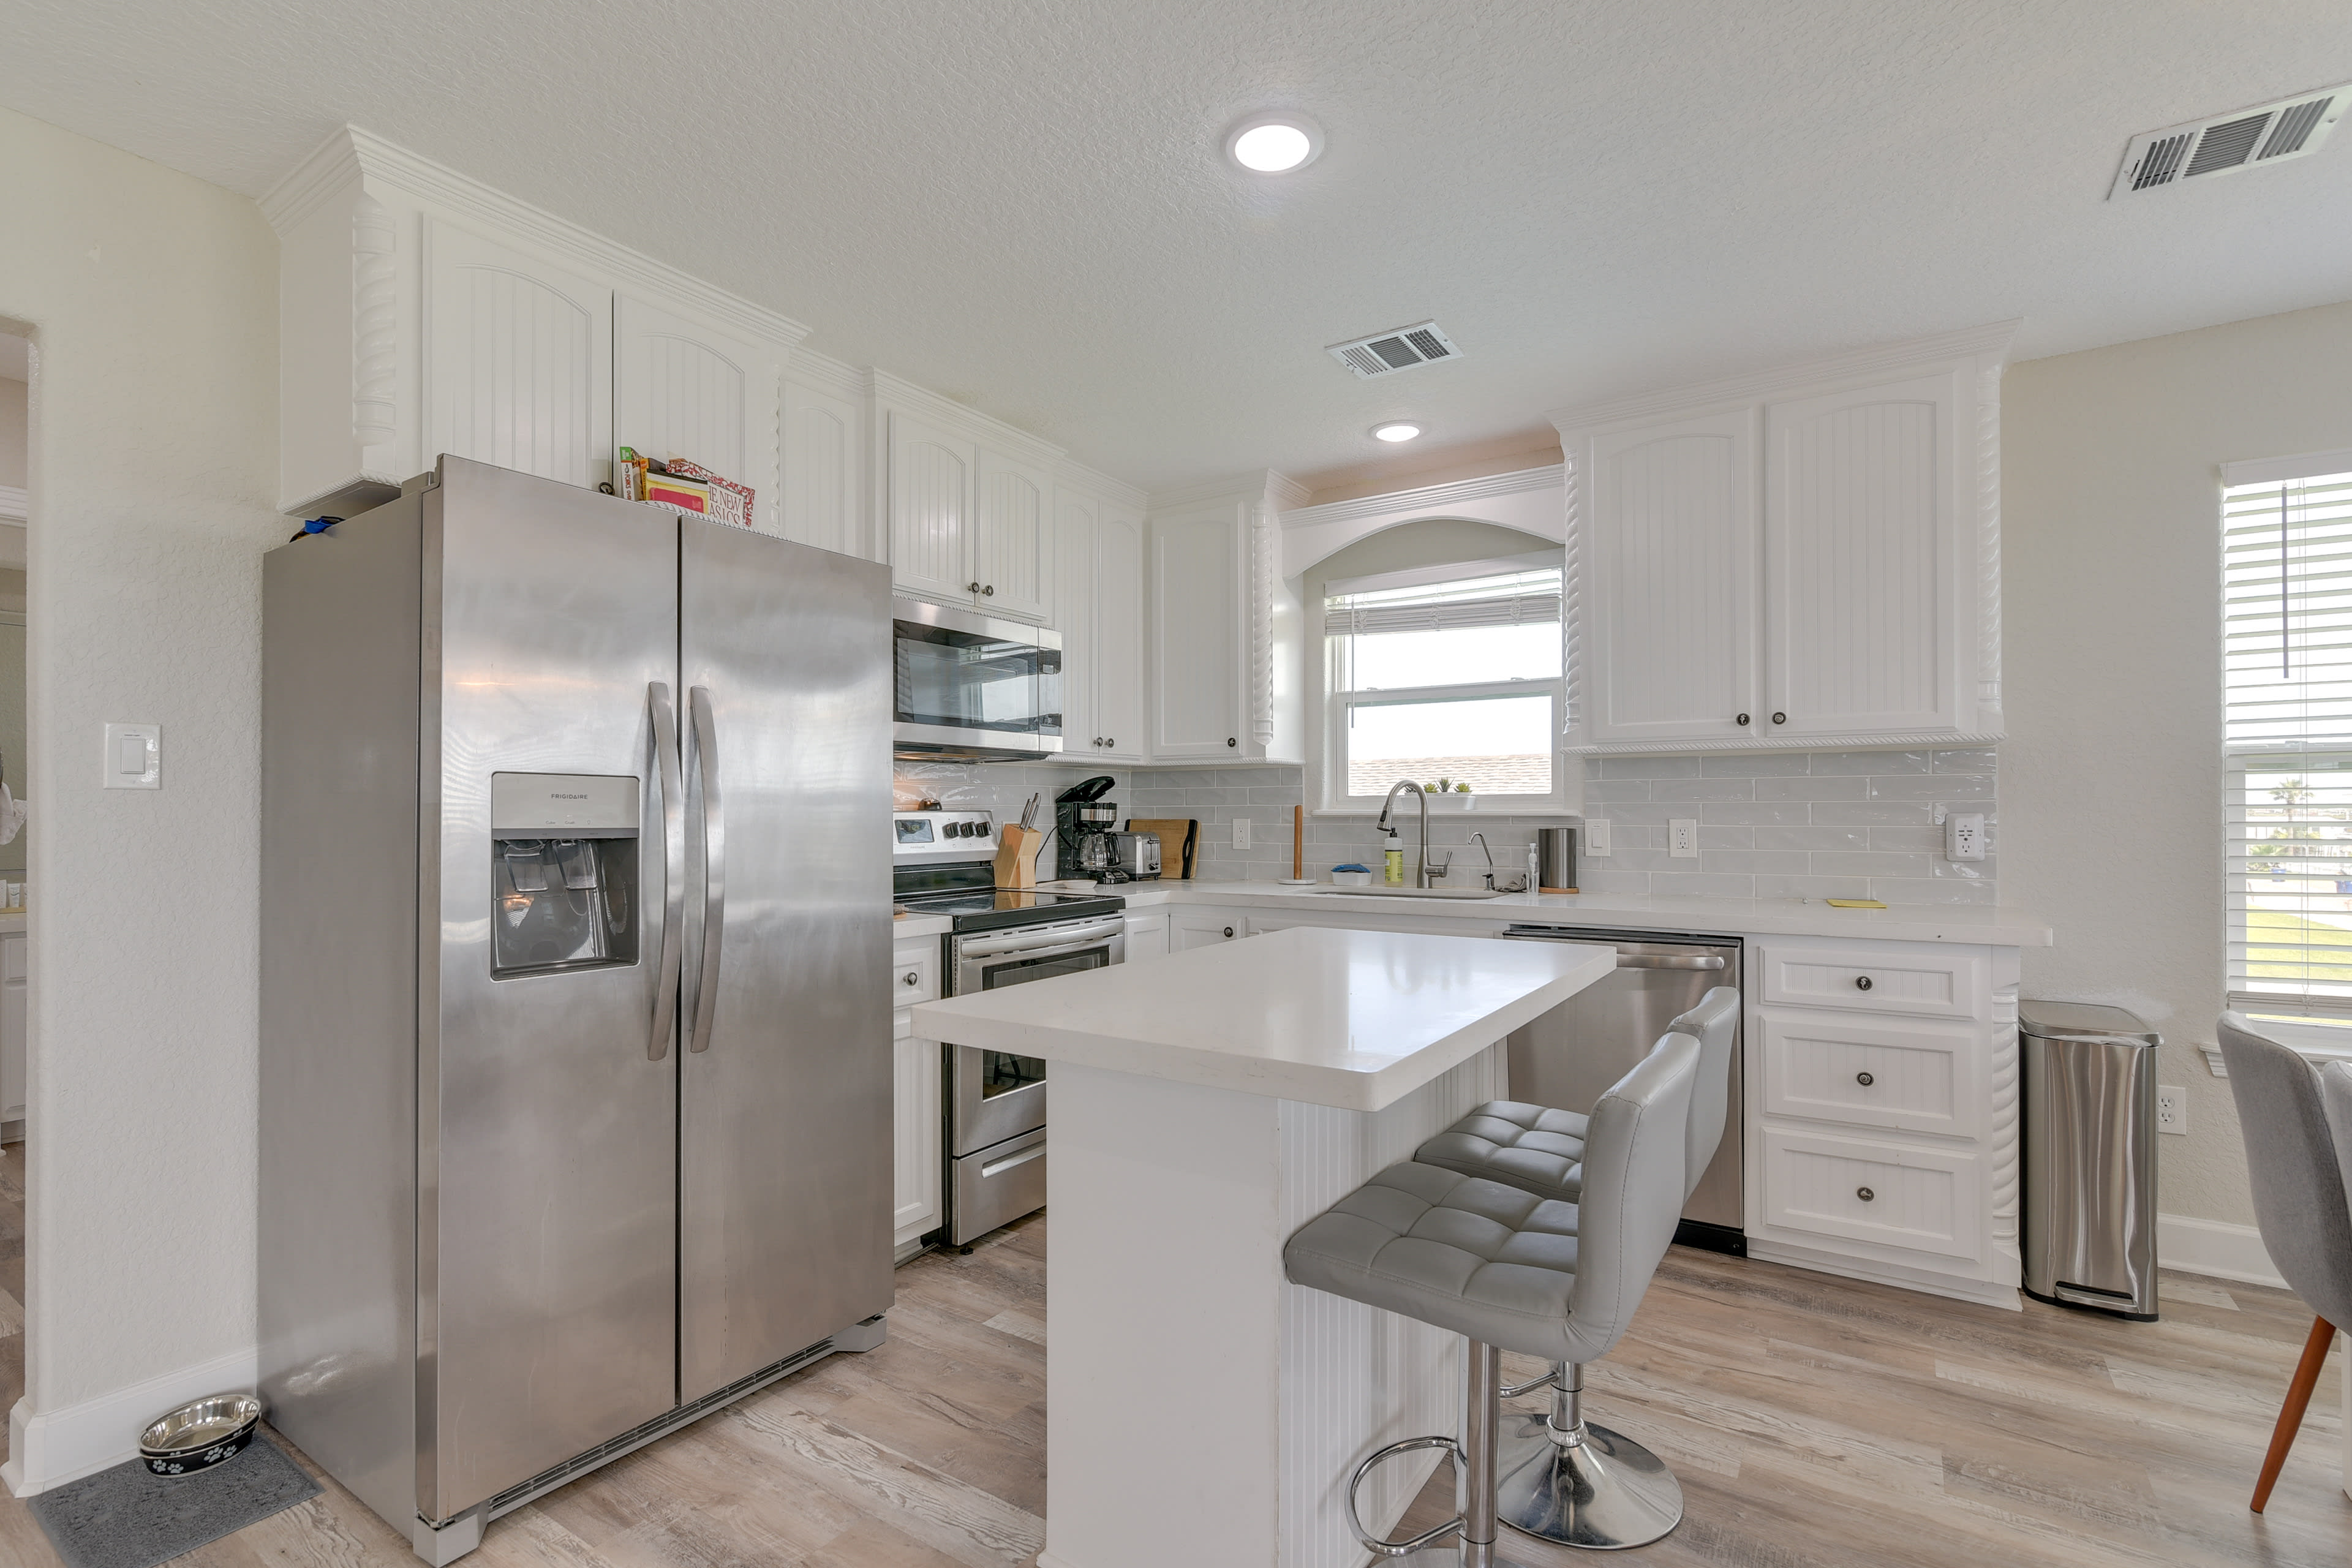 Kitchen | Main Floor | Fully Equipped